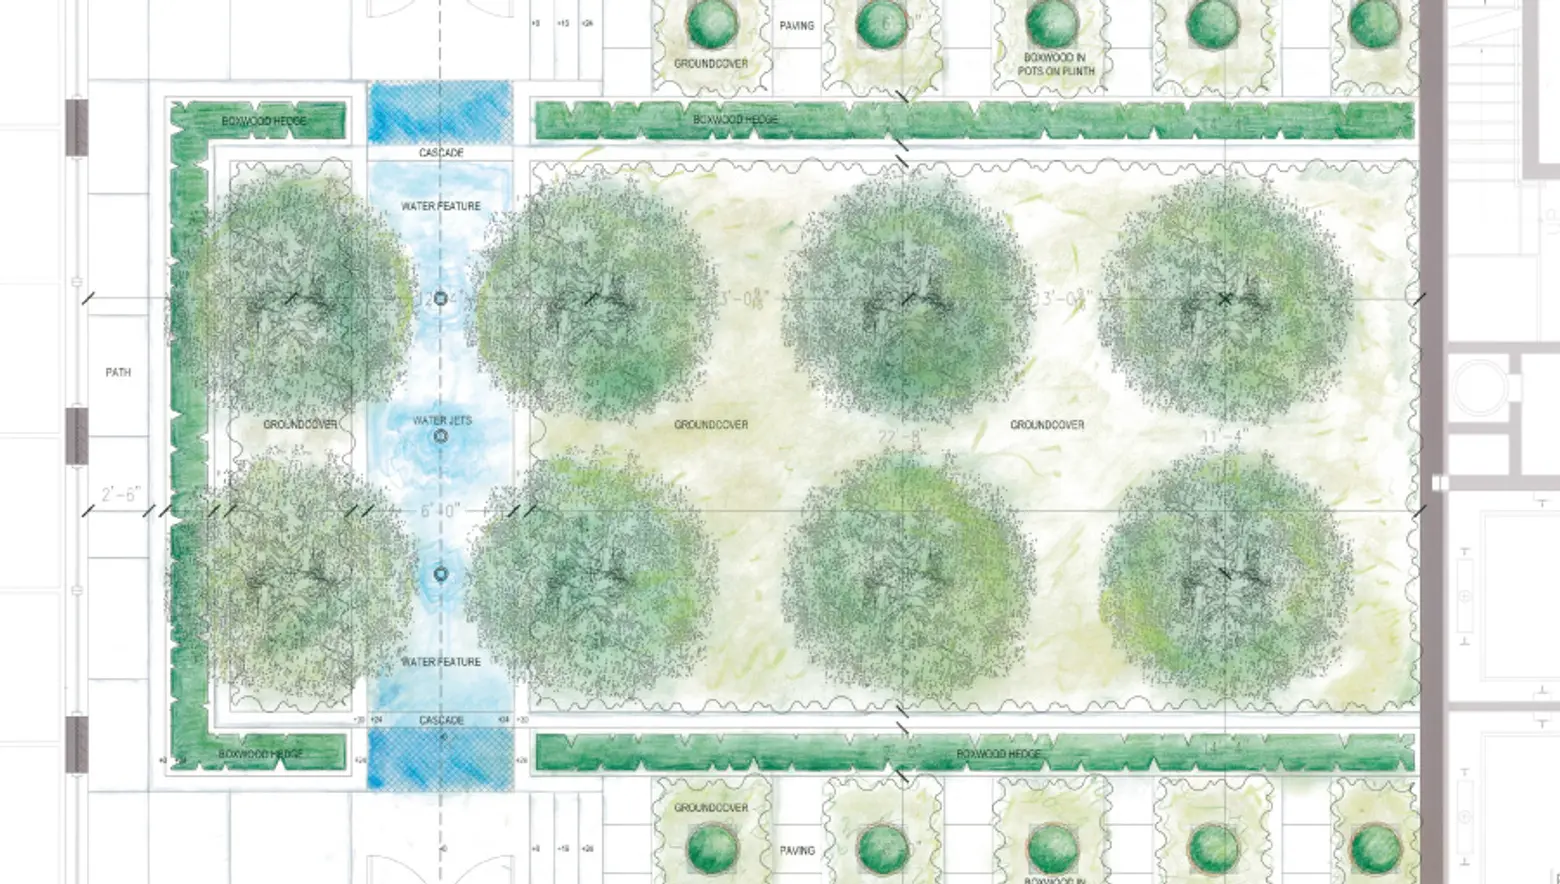 A rendering of the "look but don't touch" courtyard to be built at the Sterling Mason plan